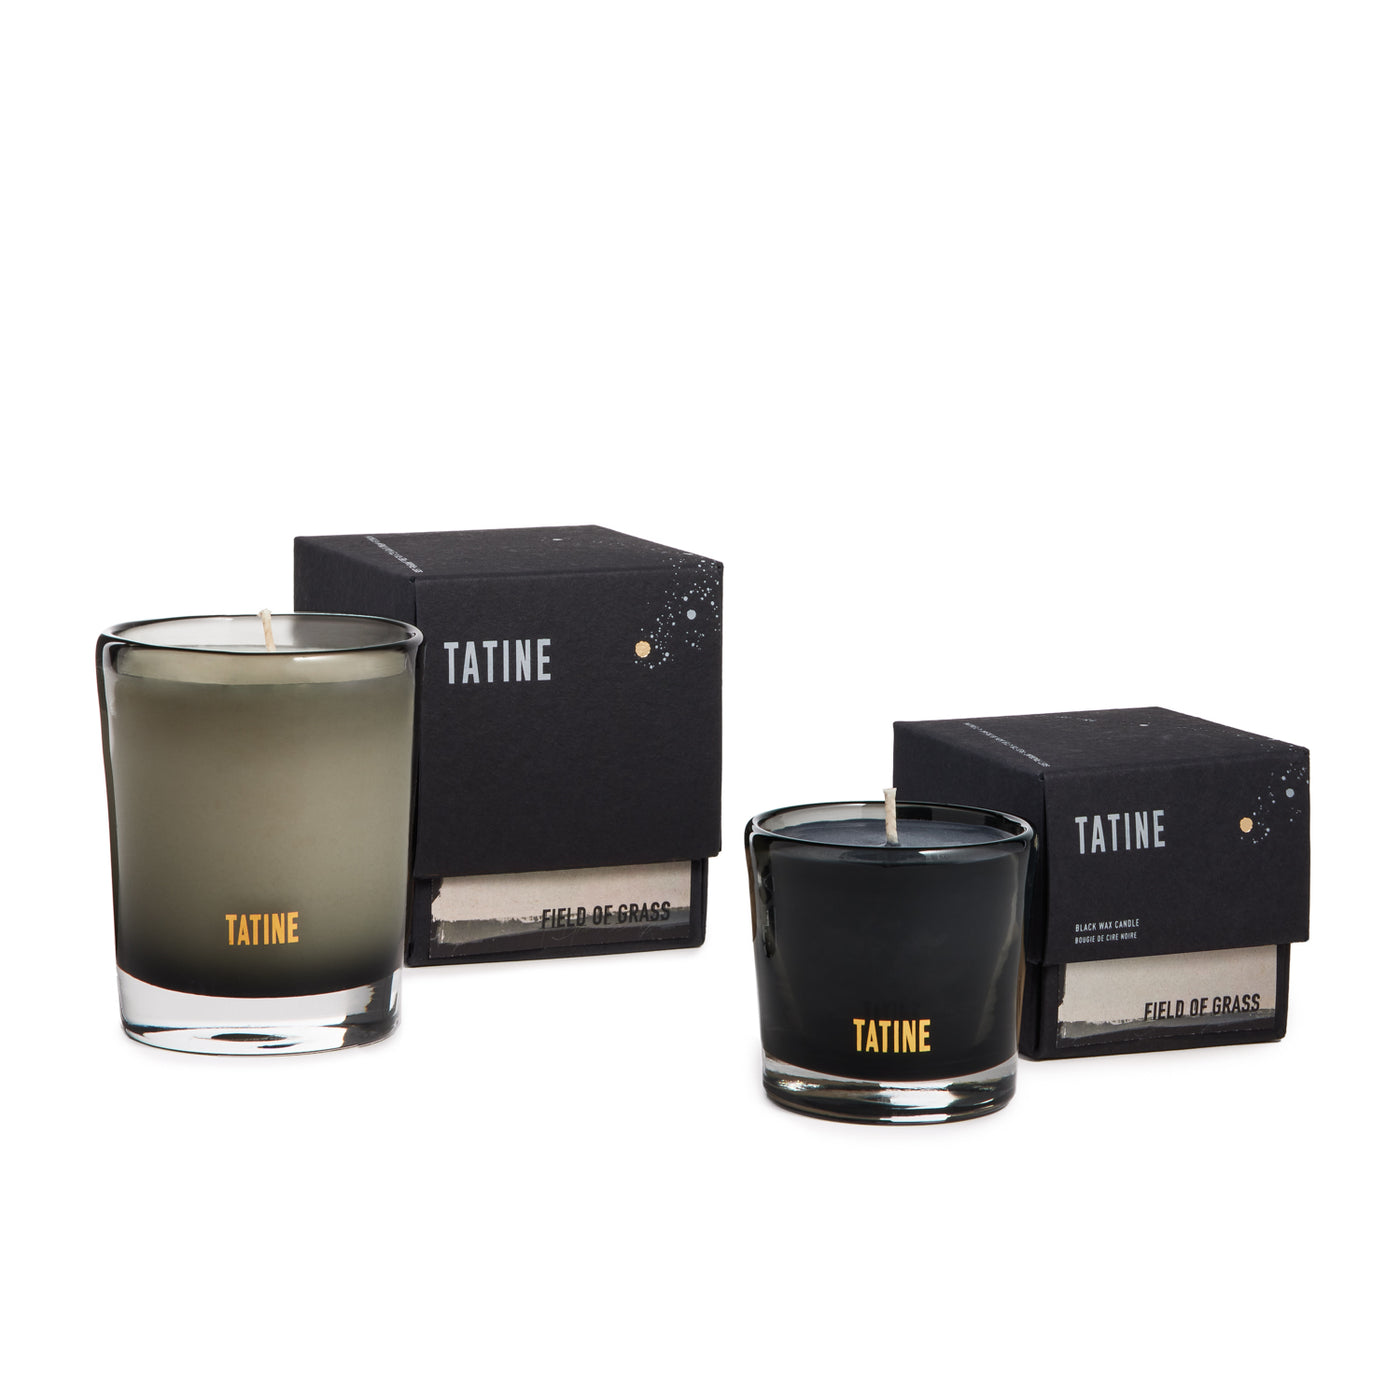 Field of Grass Tatine Candle